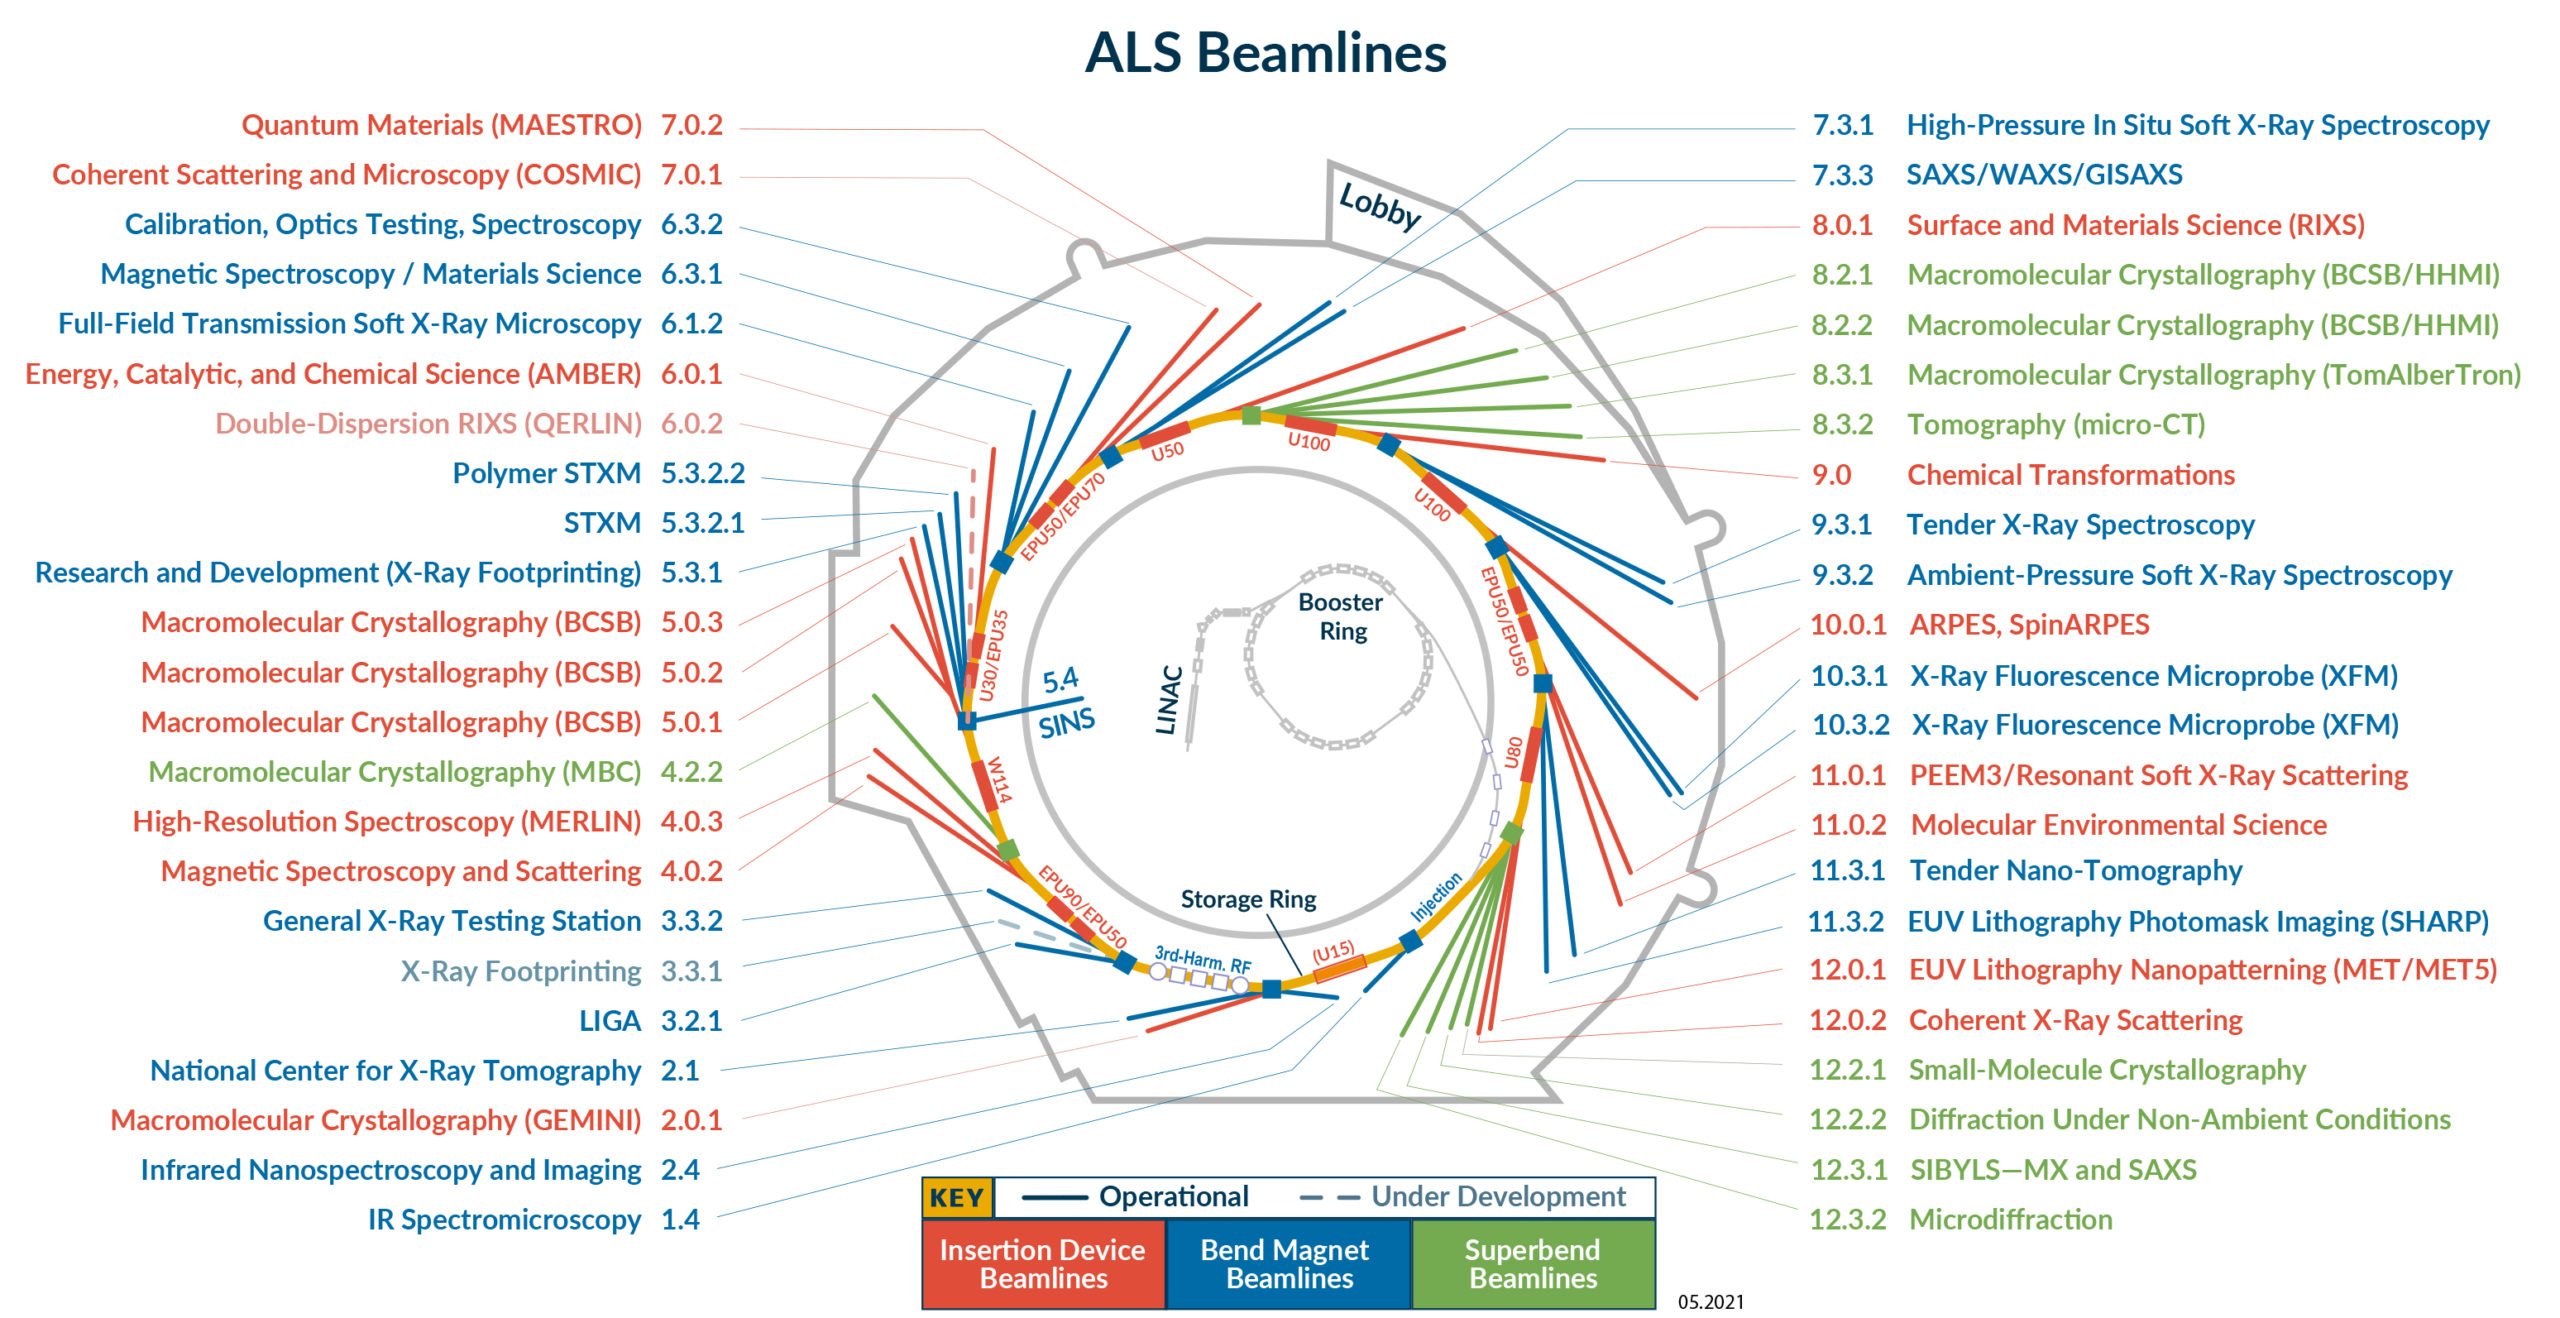 ALS Beamline graphic showing beamline names, numbers, and locations.